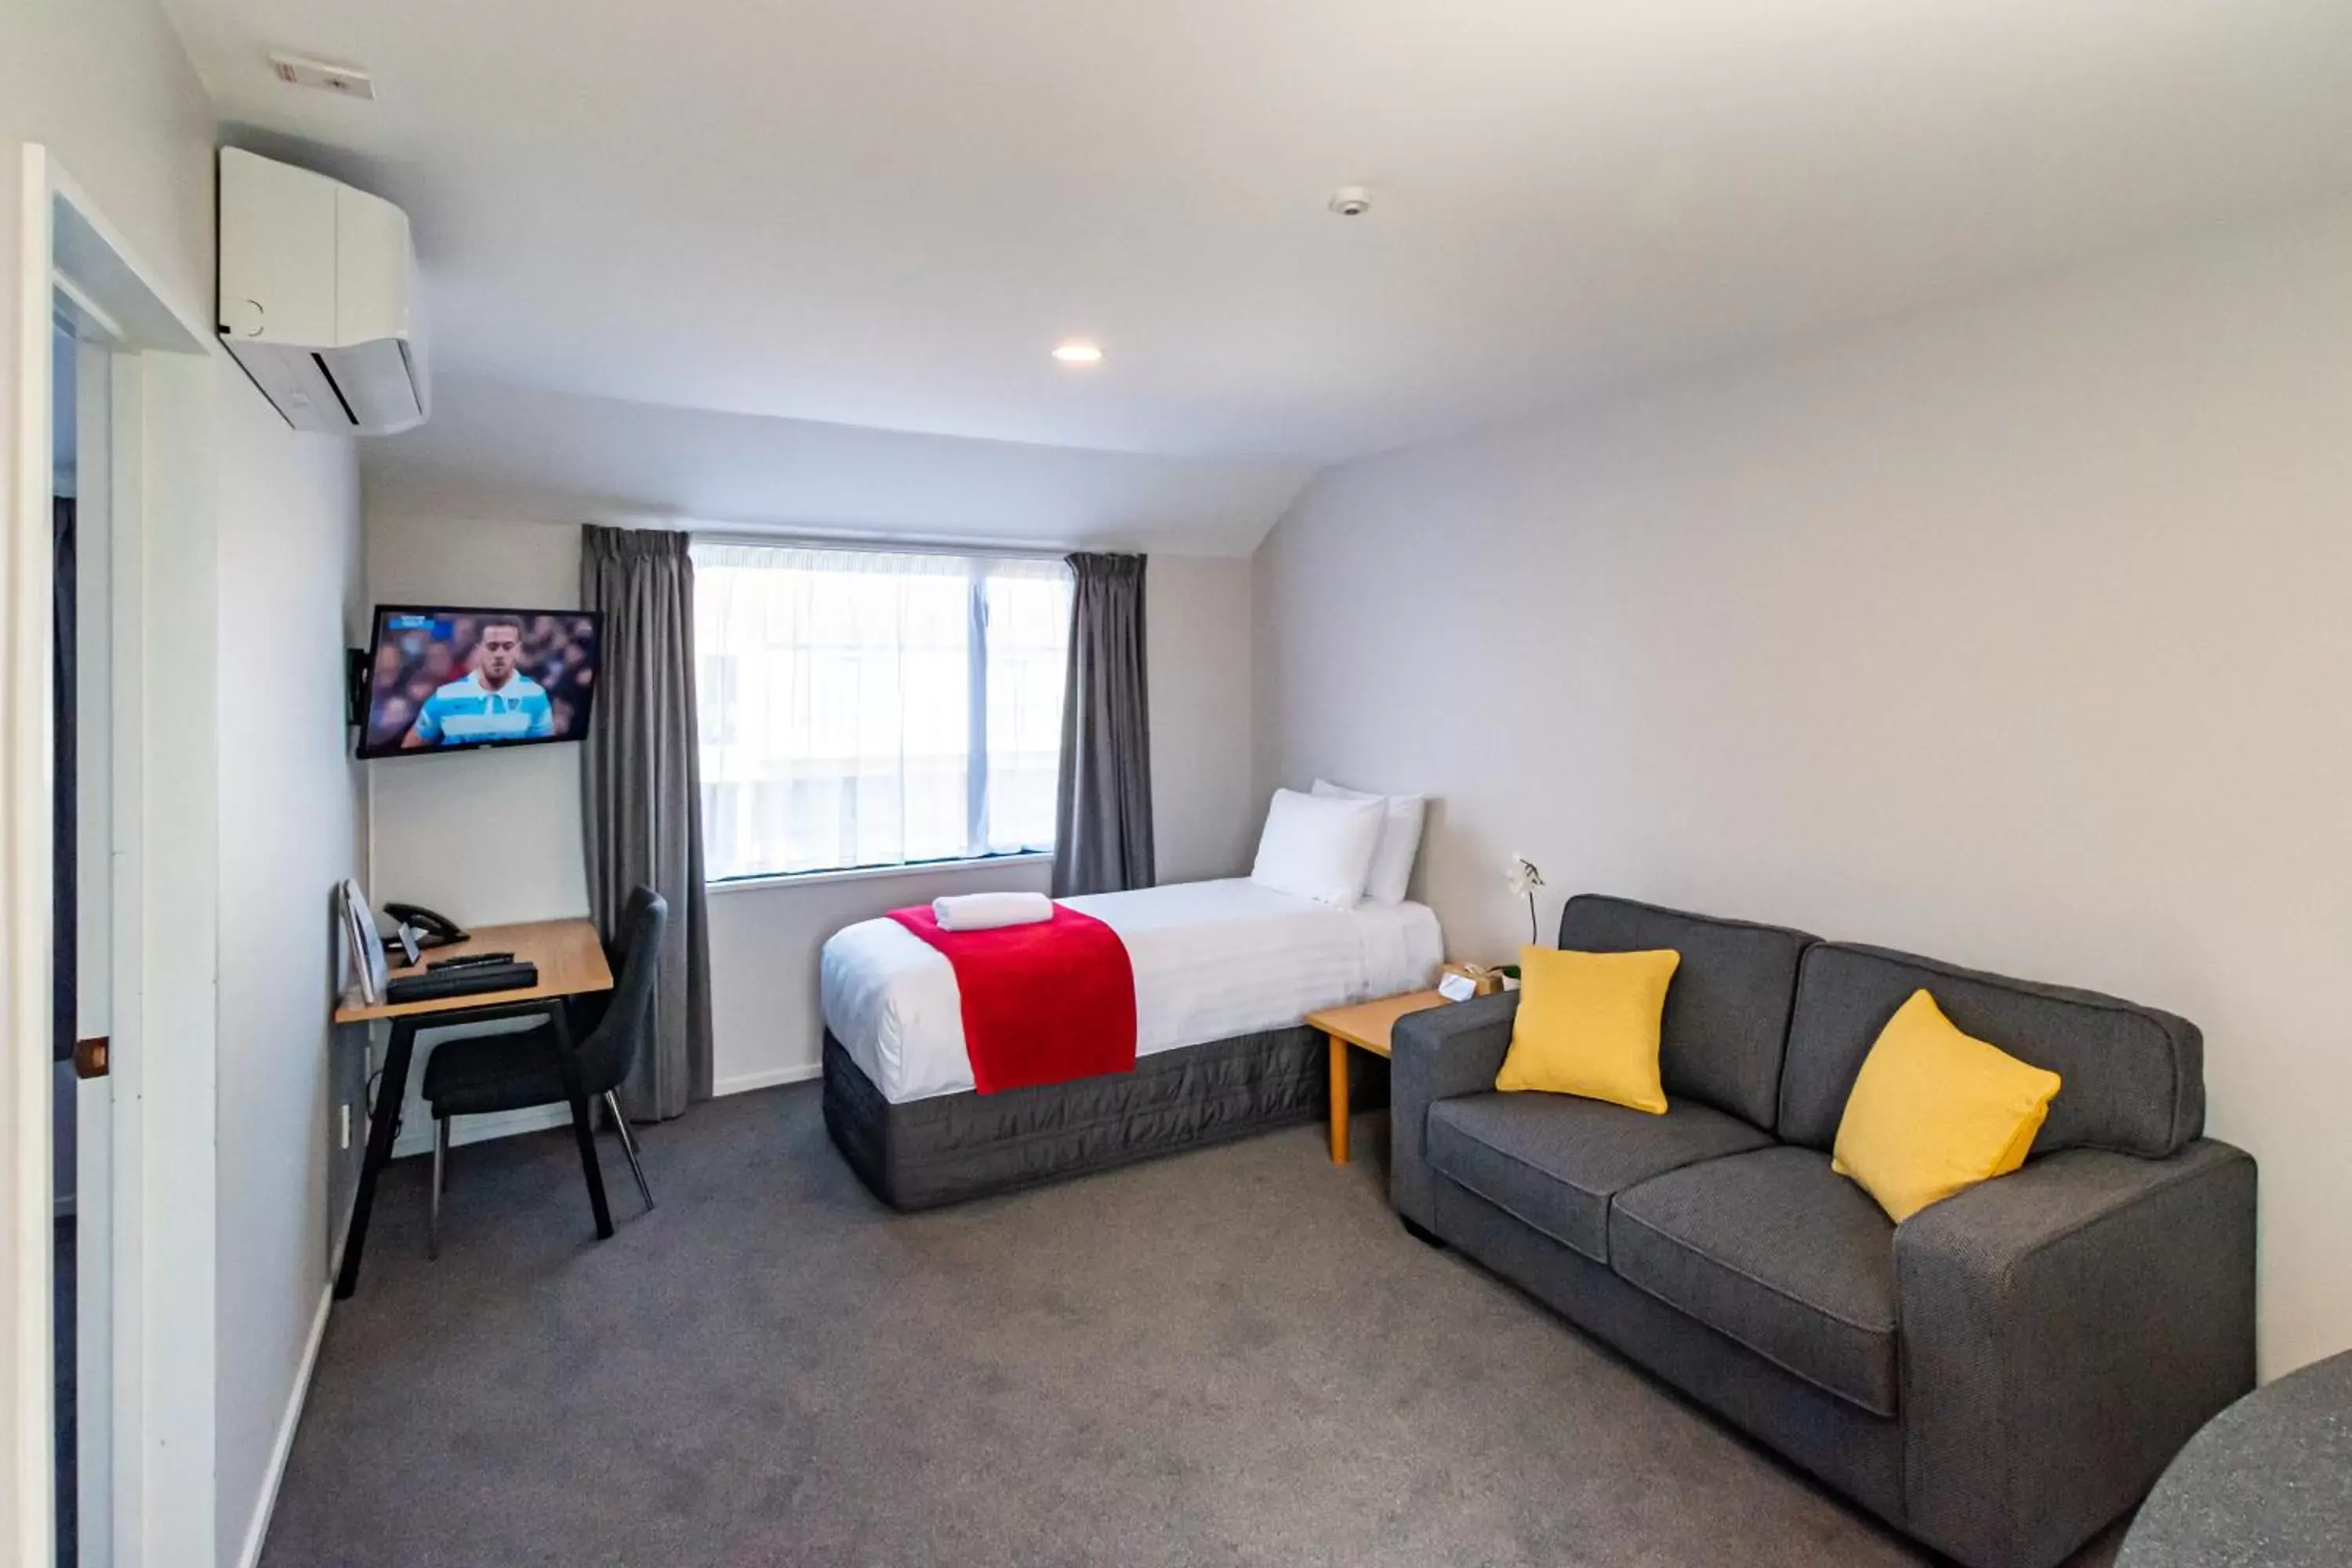 TV and multimedia in Riccarton Mall Motel